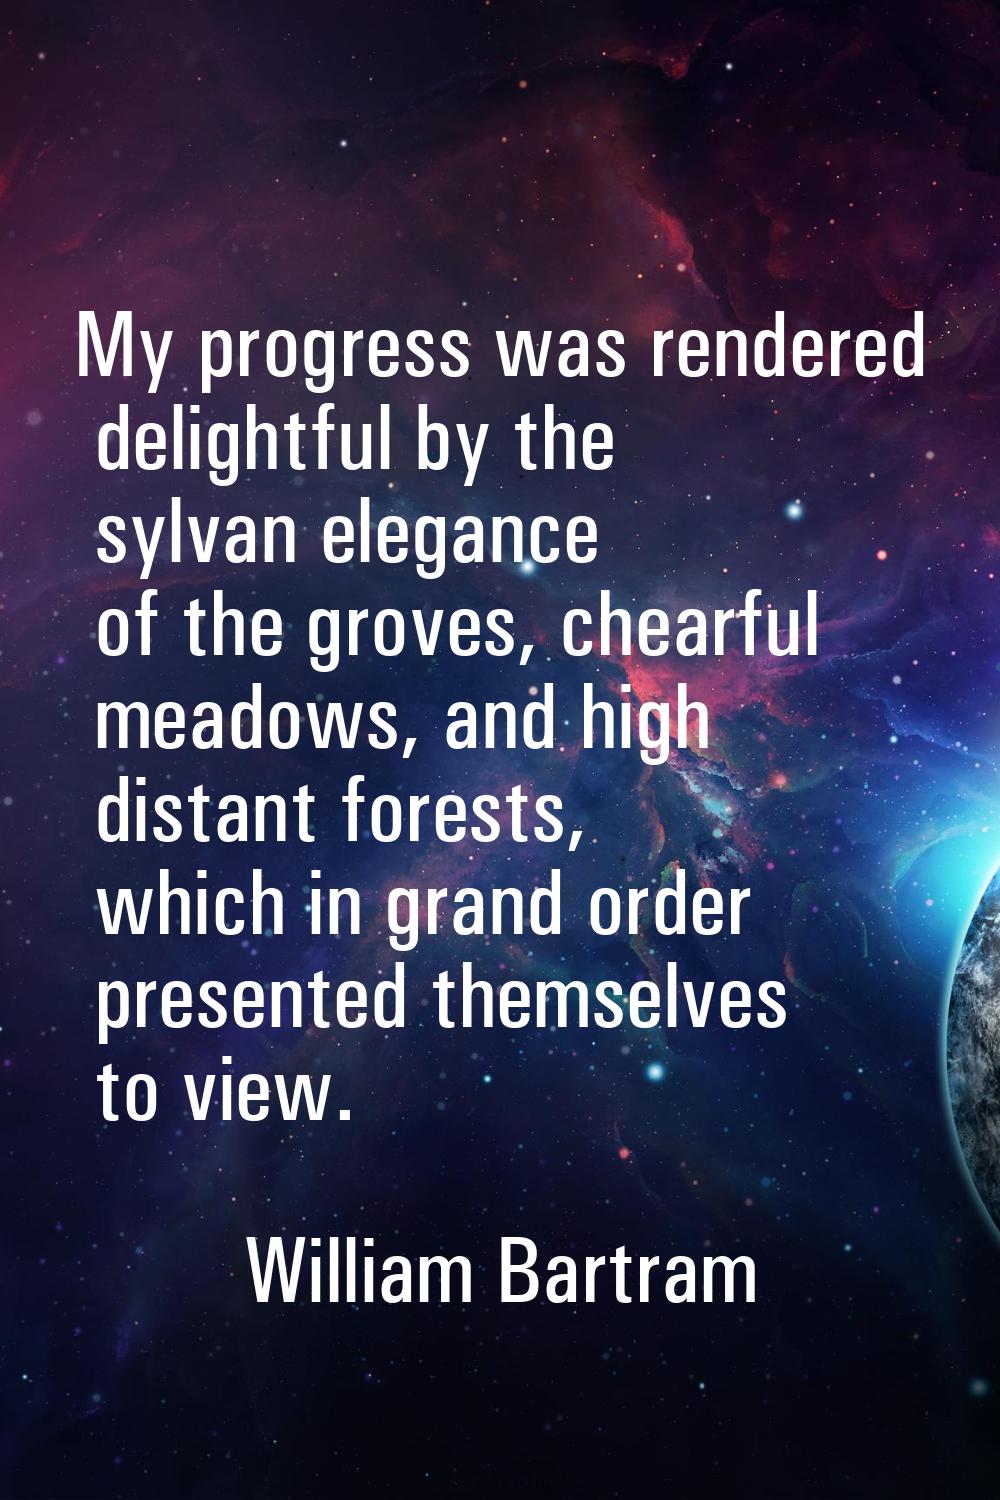 My progress was rendered delightful by the sylvan elegance of the groves, chearful meadows, and hig